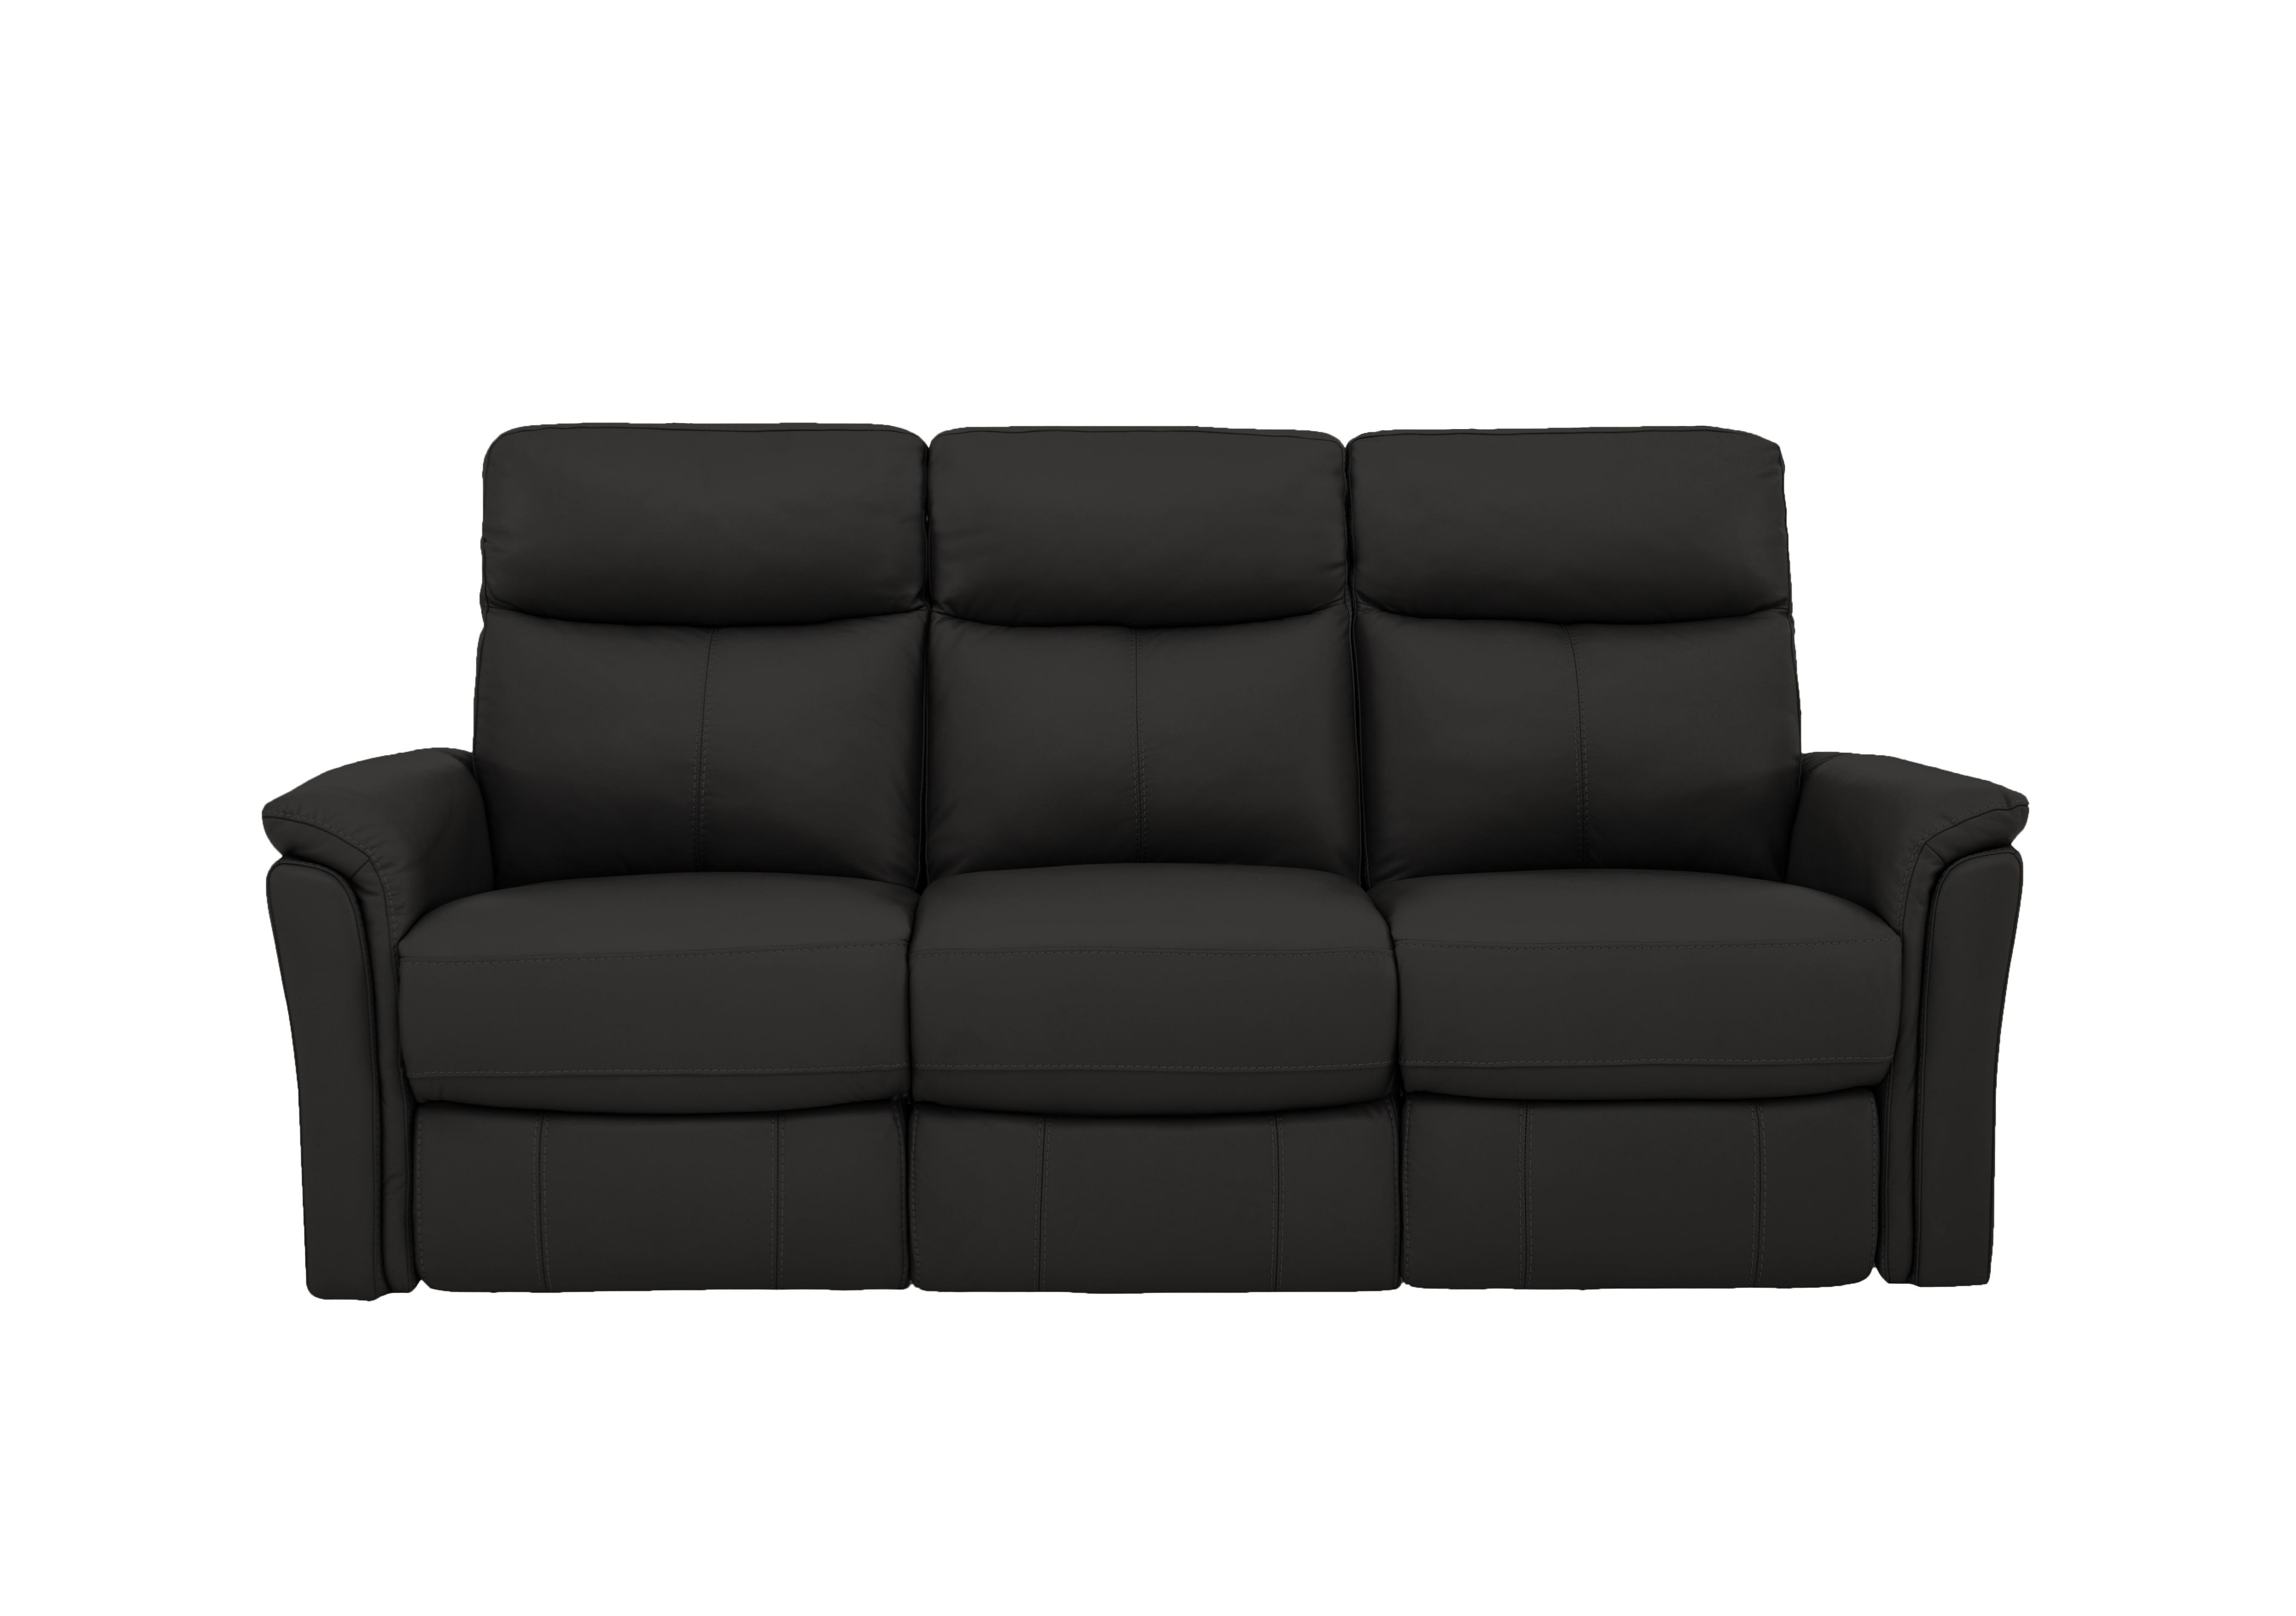 Compact Collection Piccolo 3 Seater Sofa in Bv-3500 Classic Black on Furniture Village